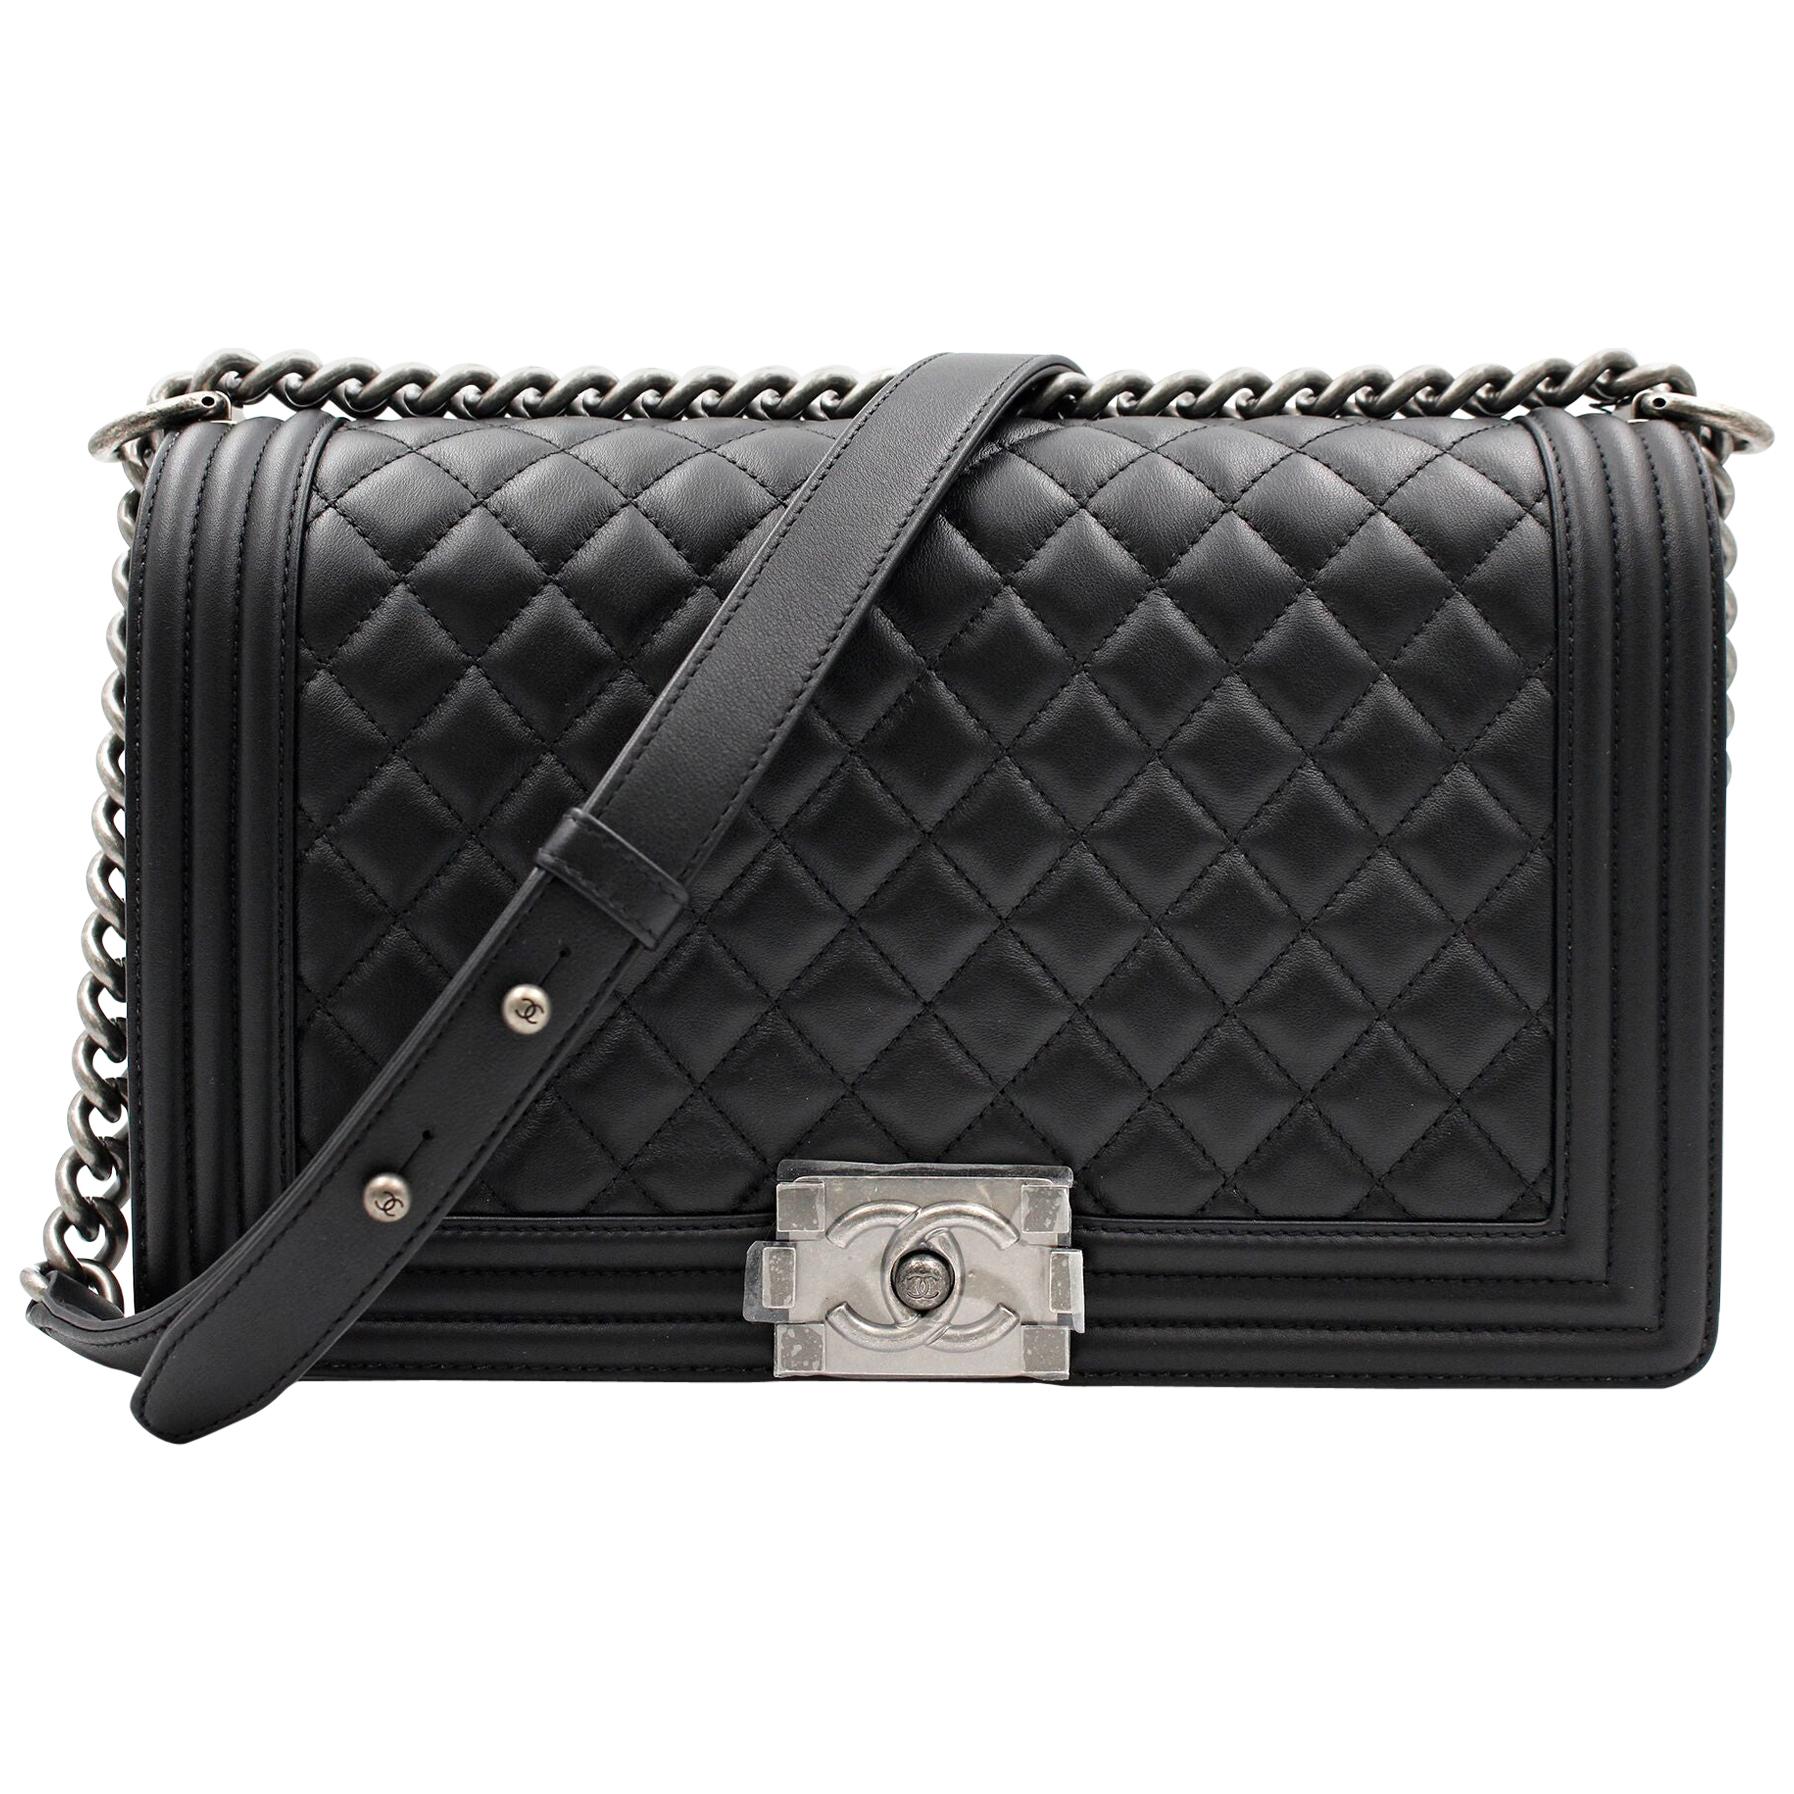 Chanel Black Calfskin Quilted Ruthenium Tone Large Boy Flap Bag A92193